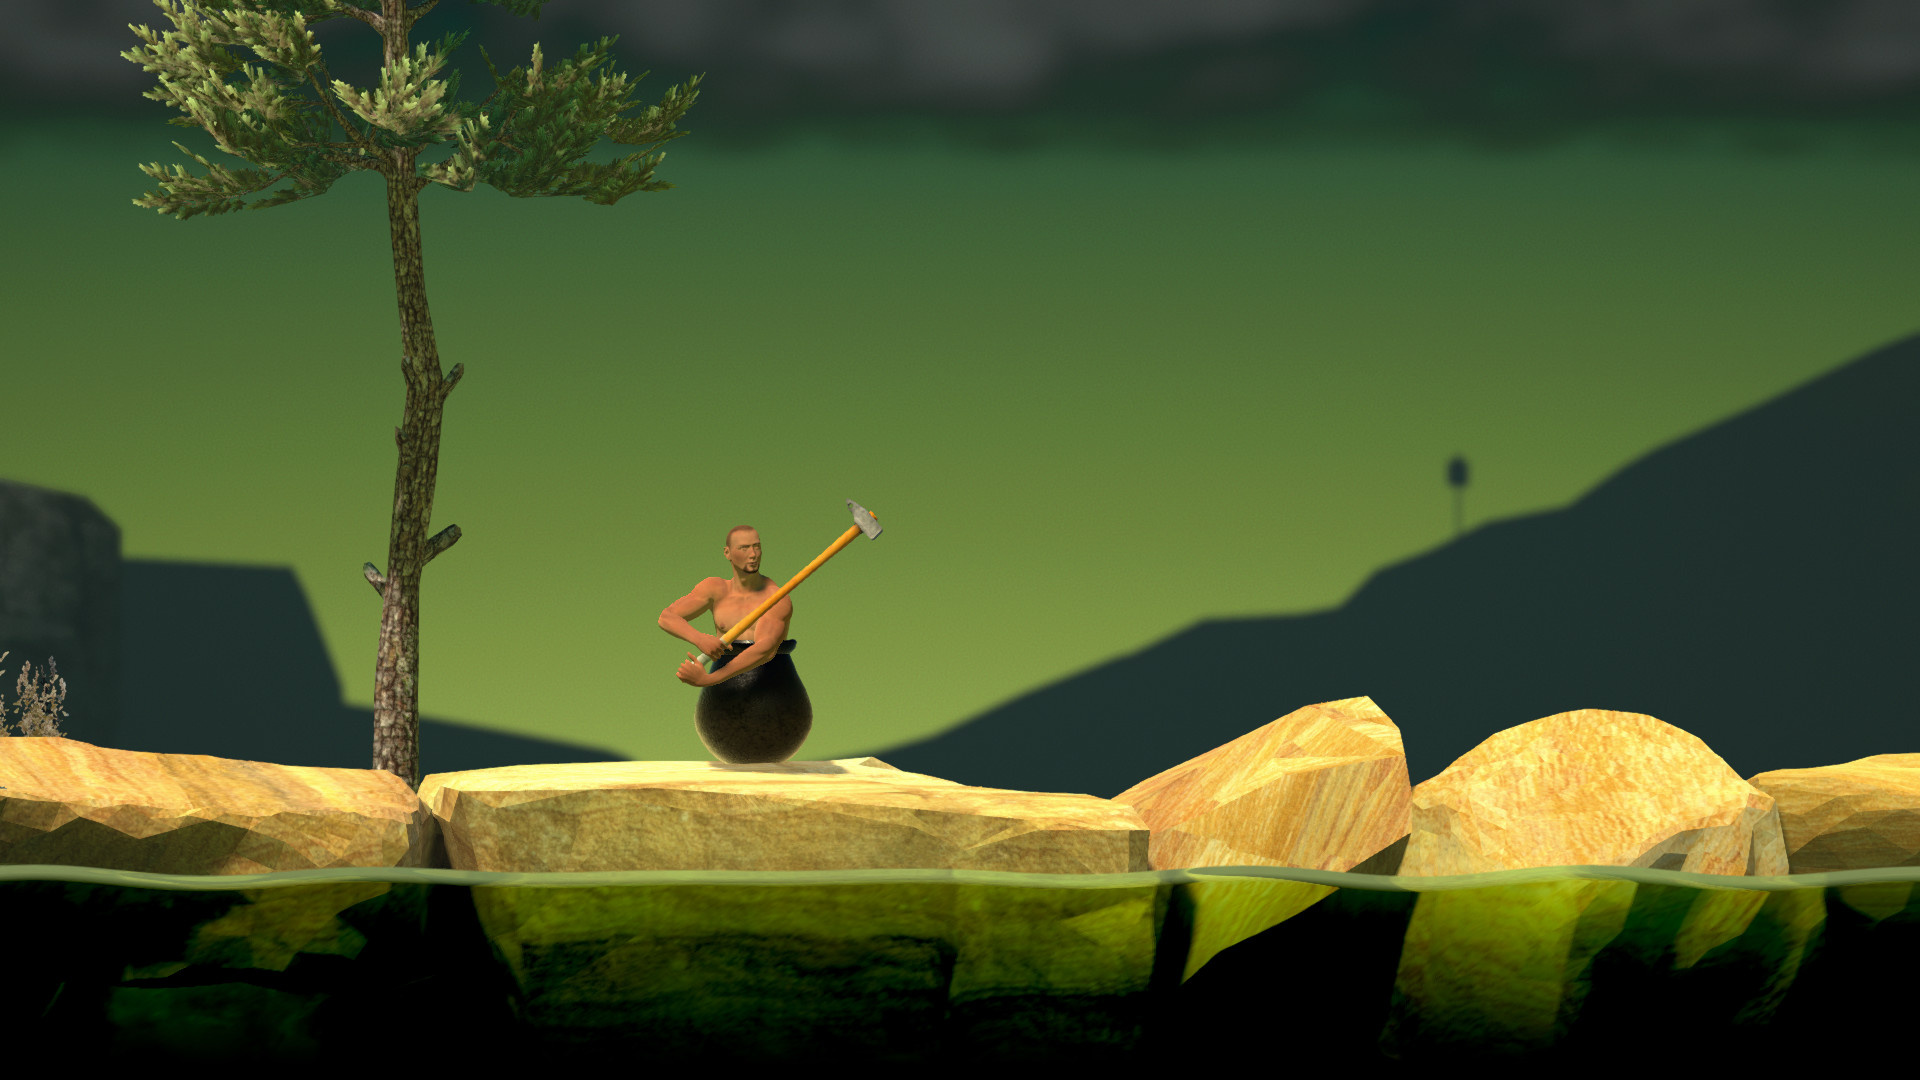 GO SOME BALLS : Only Up and Getting Over It System Requirements